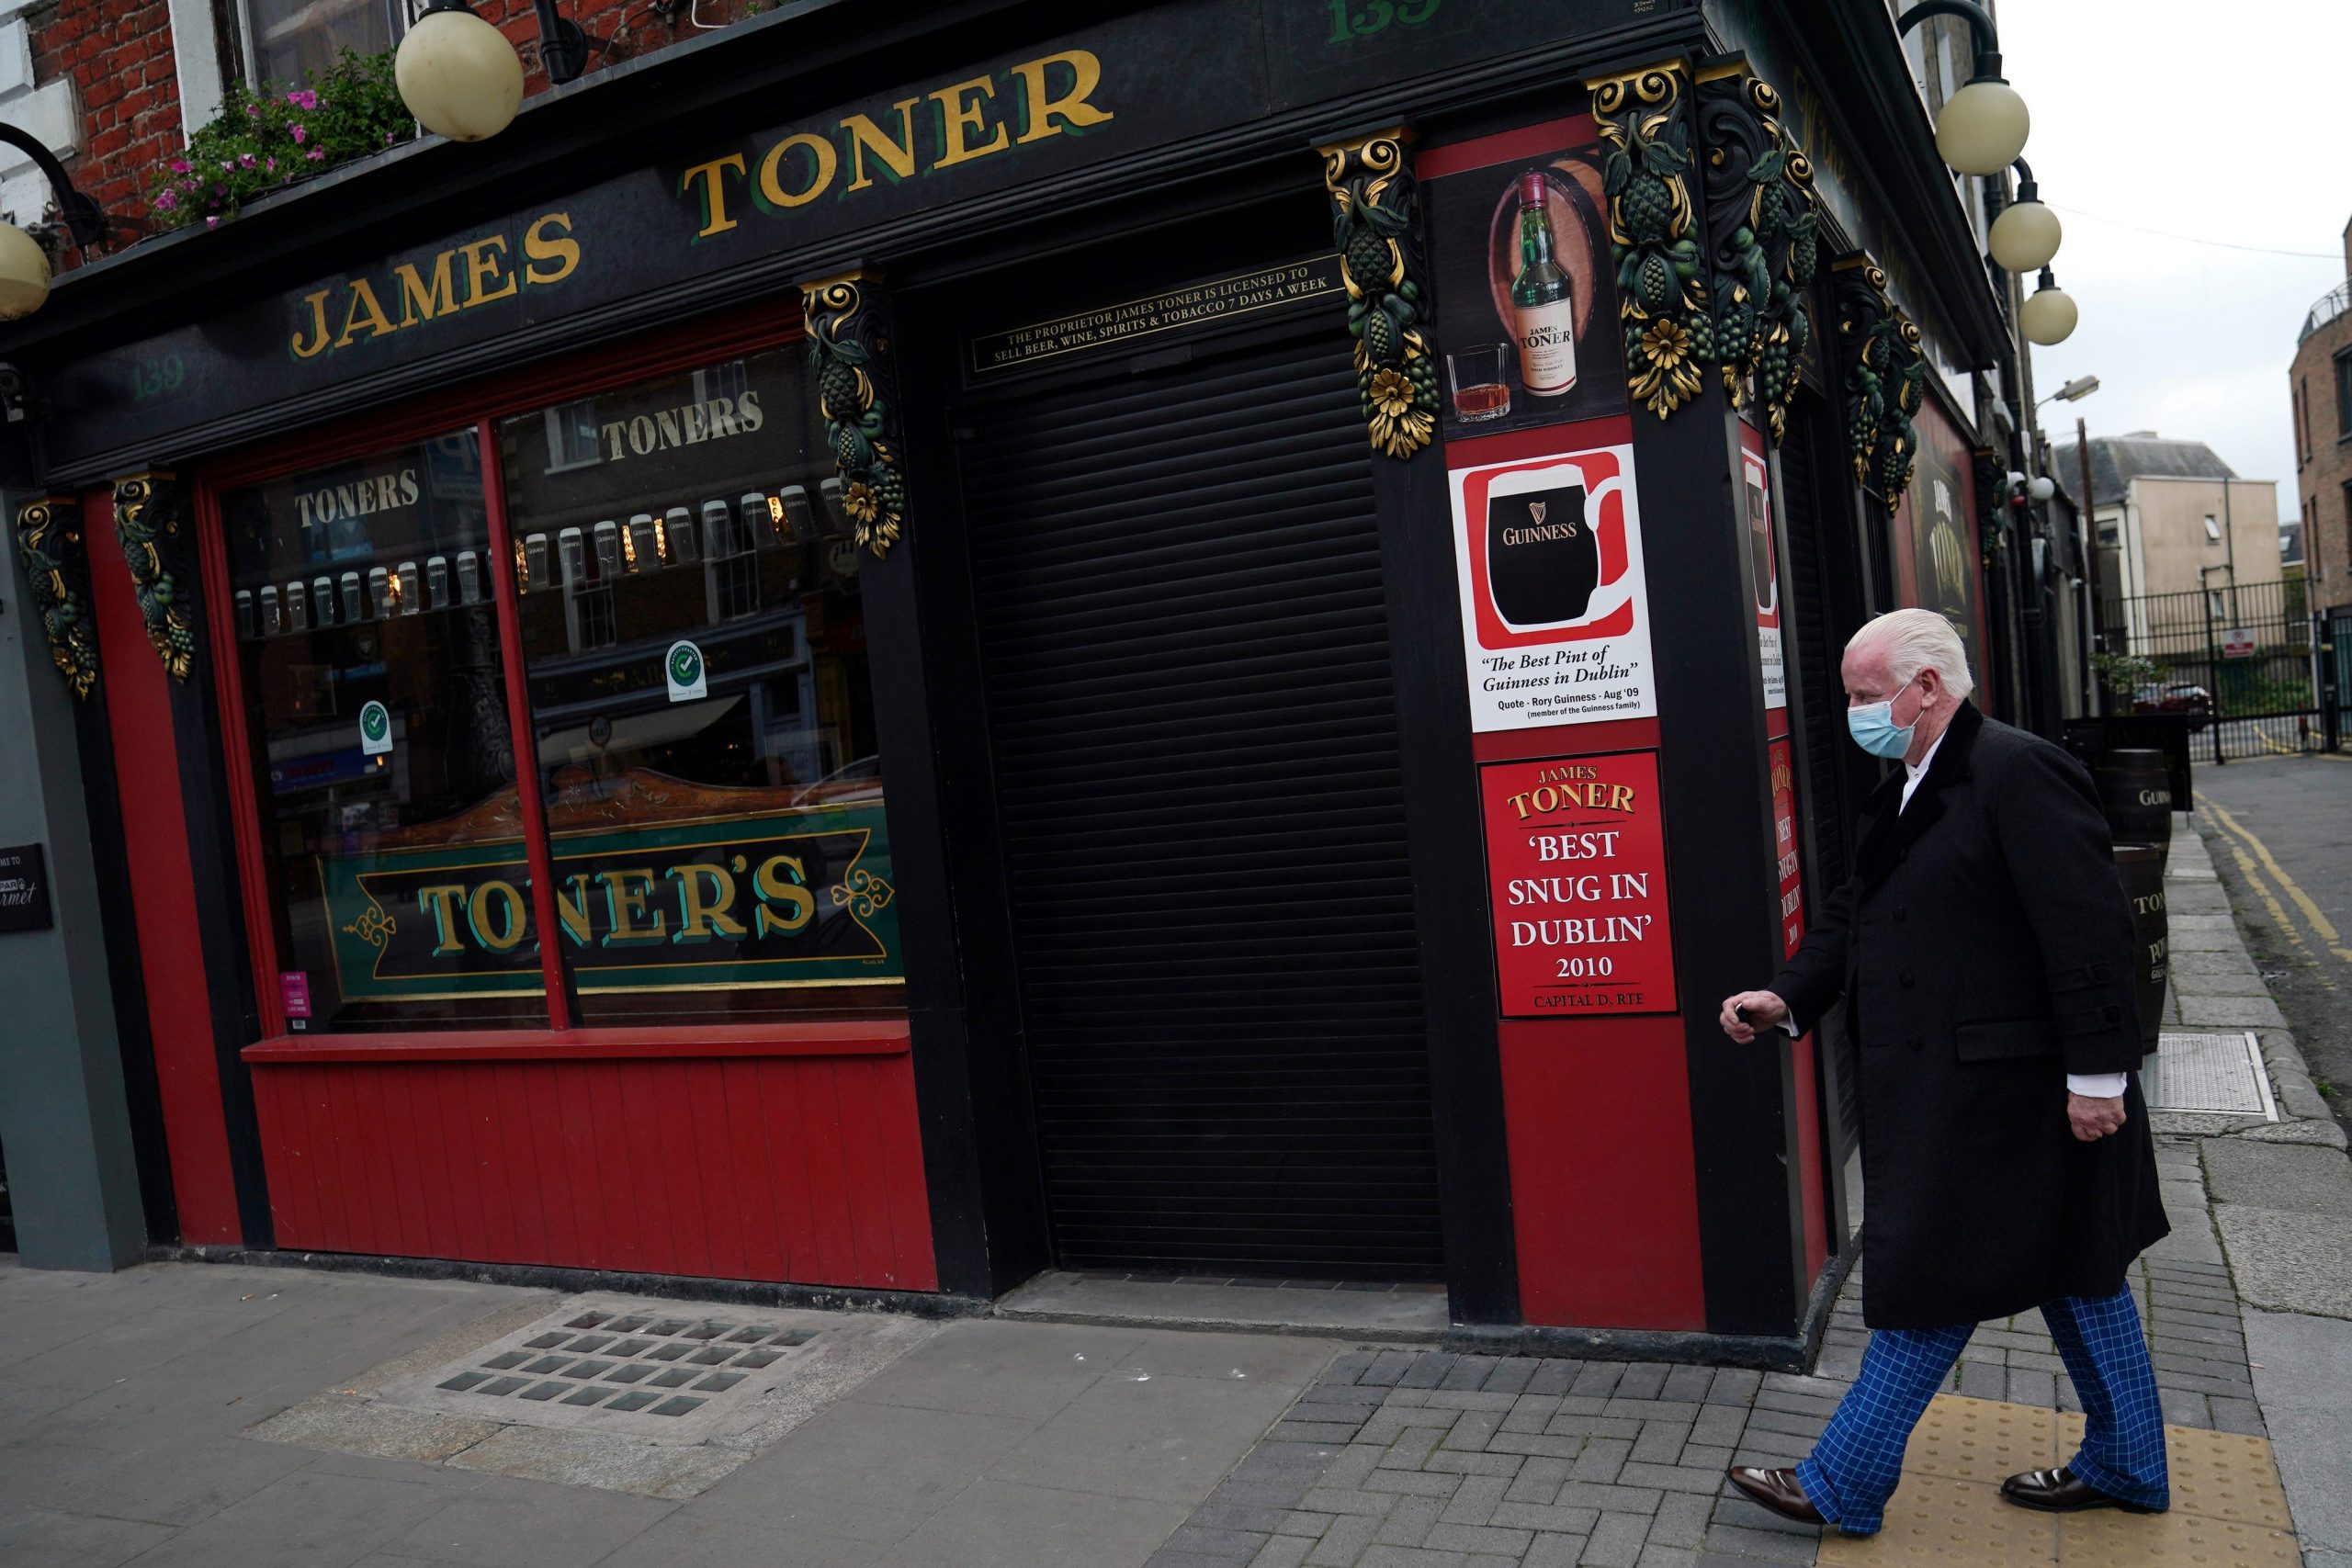 A man wearing a protective face mask walks past a closed pub amid the coronavirus disease (COVID-19) outbreak, in Dublin, Ireland October 1, 2020.